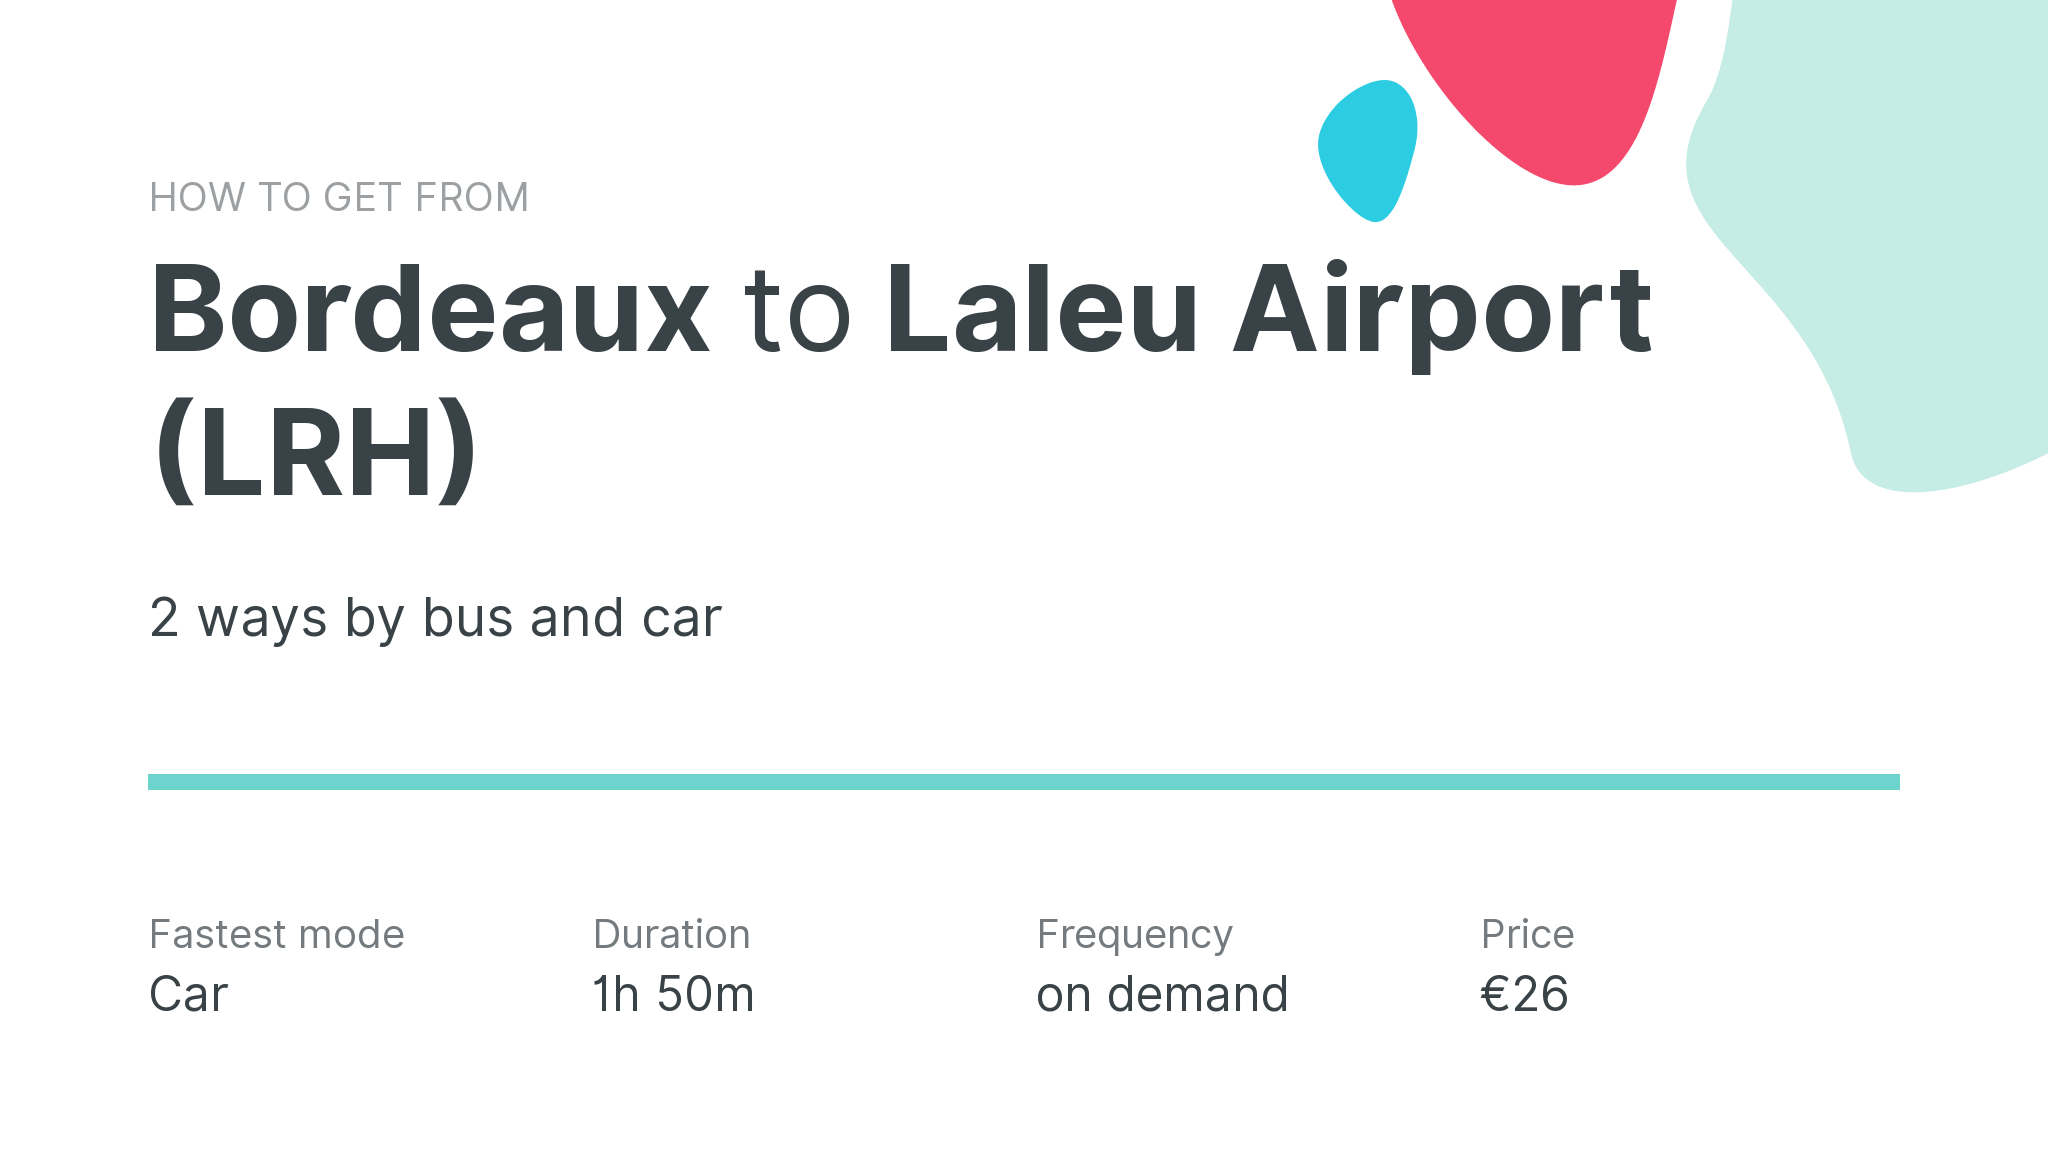 How do I get from Bordeaux to Laleu Airport (LRH)